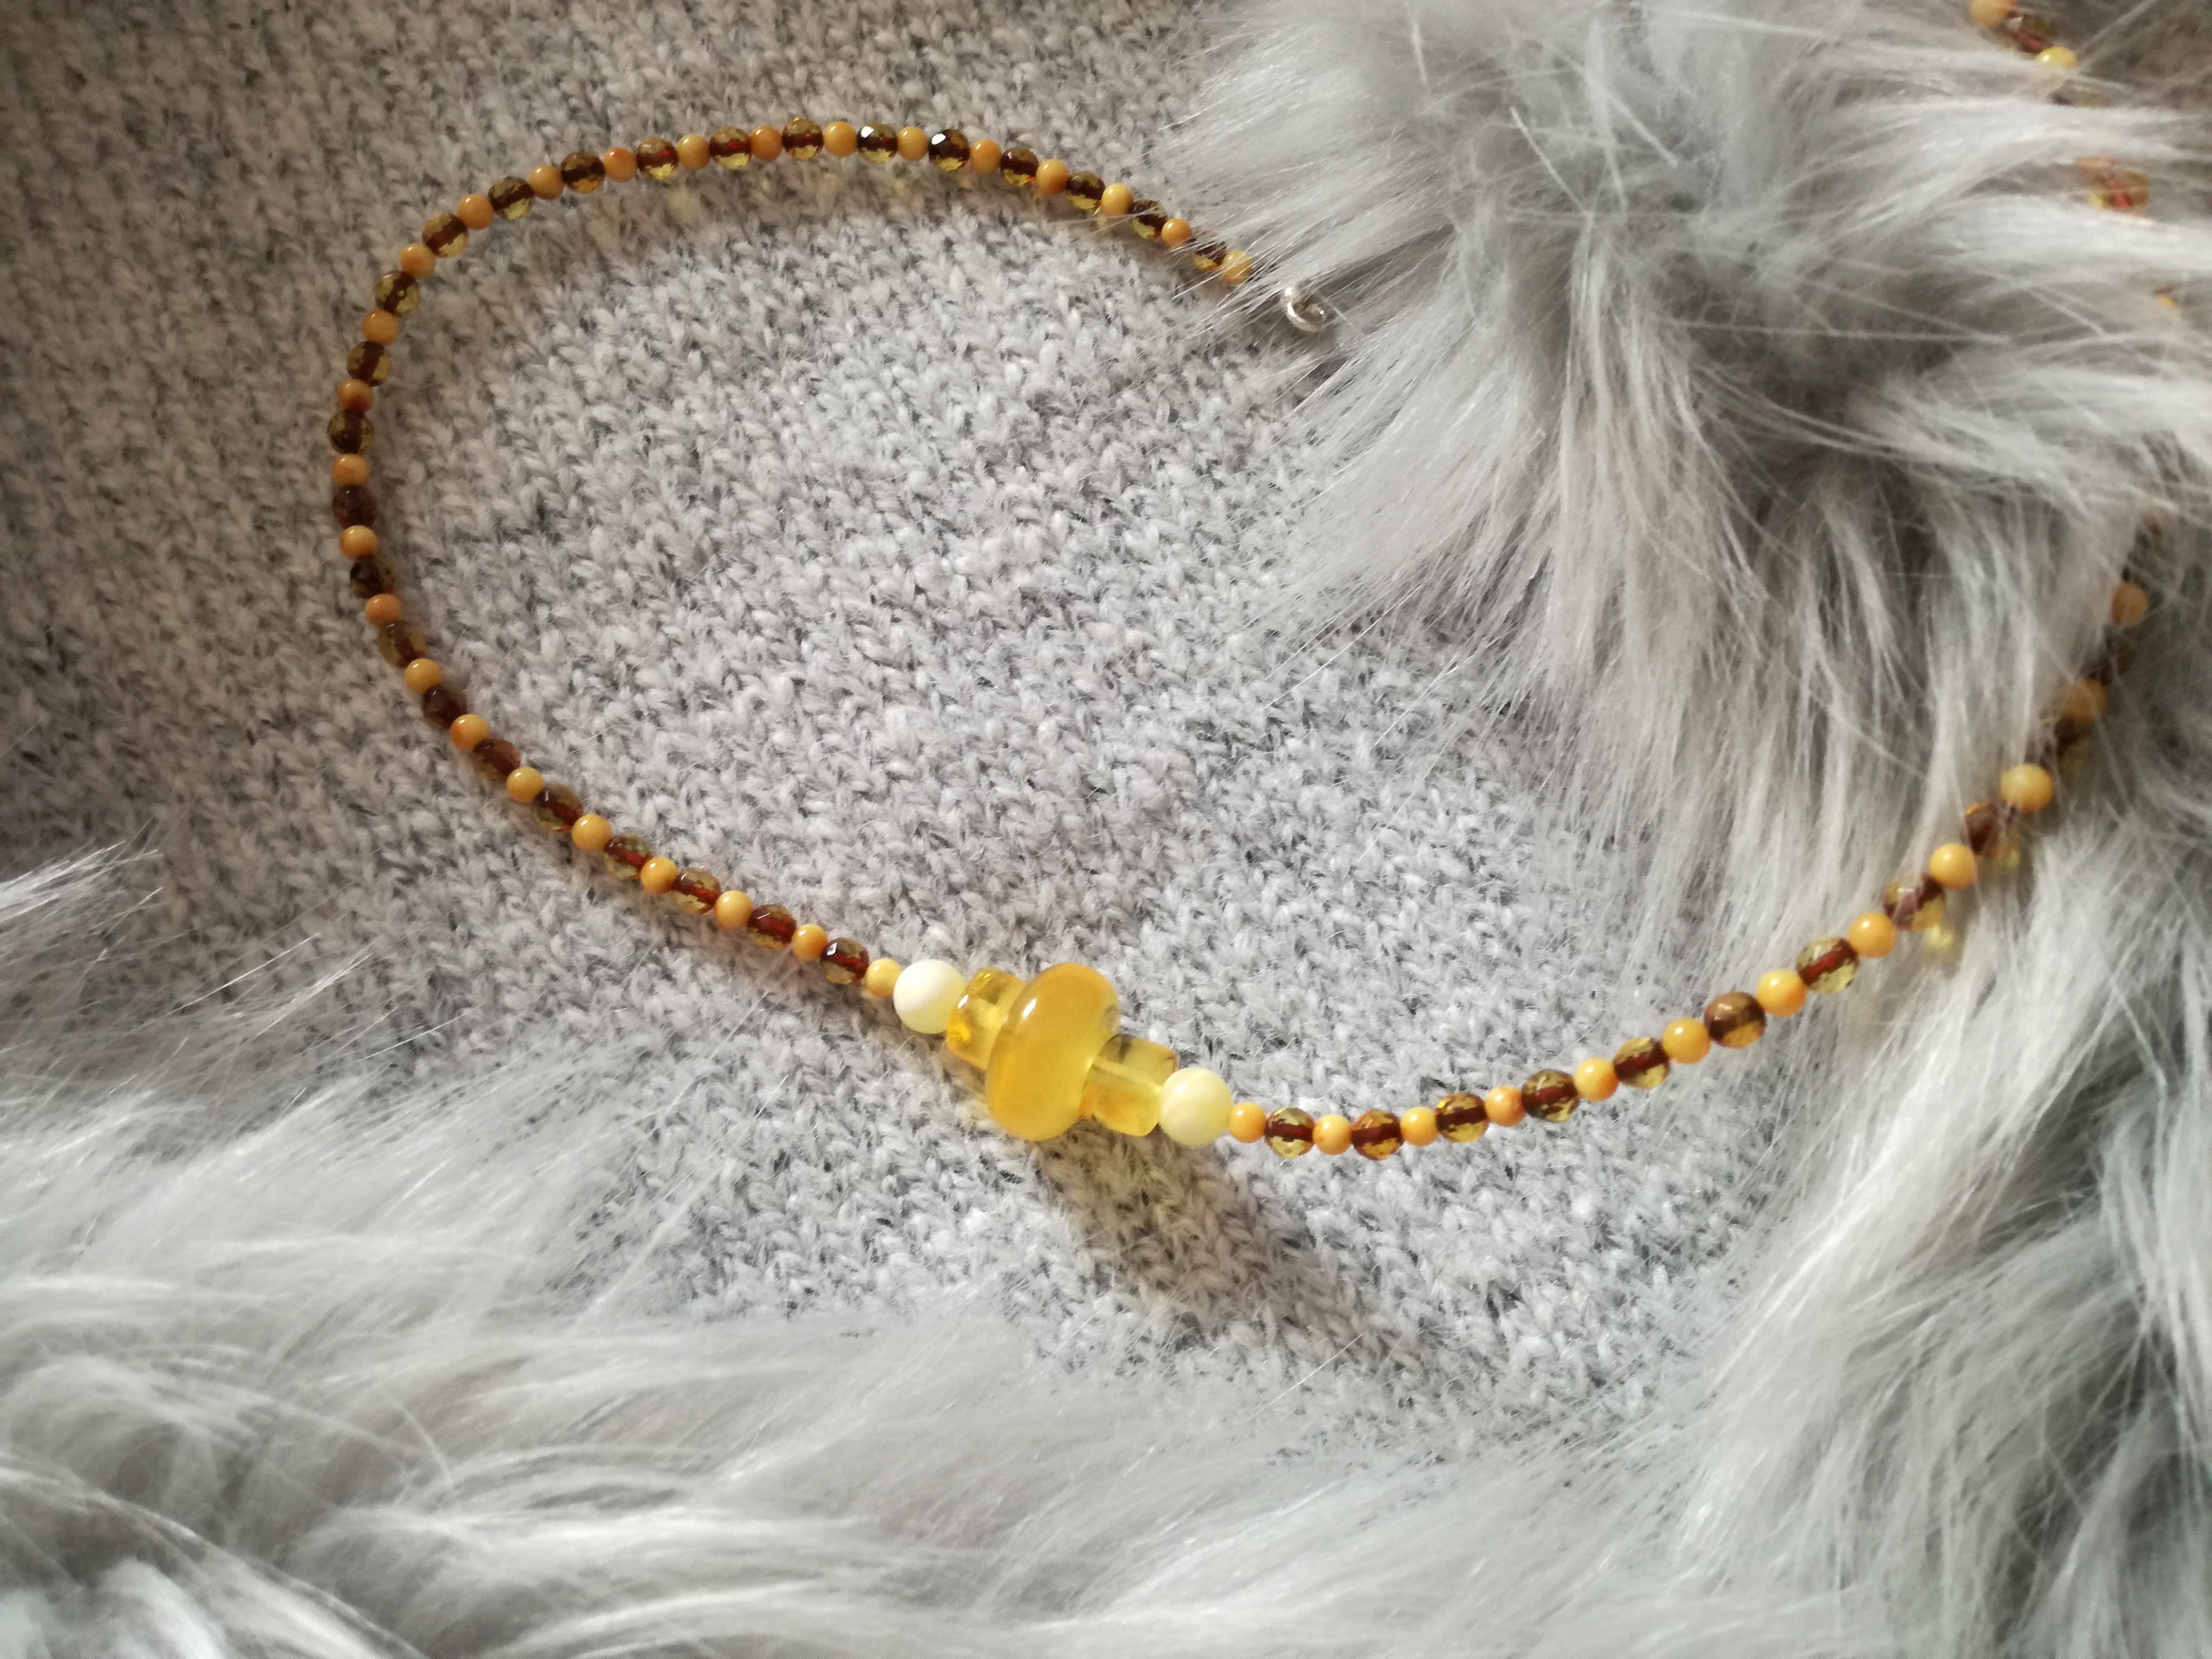 Genuine Handmade Baltic Amber Necklace for Adults, small polished and faceted beads, multicolor, Healing properties, Nursing Mums, Gift for Women